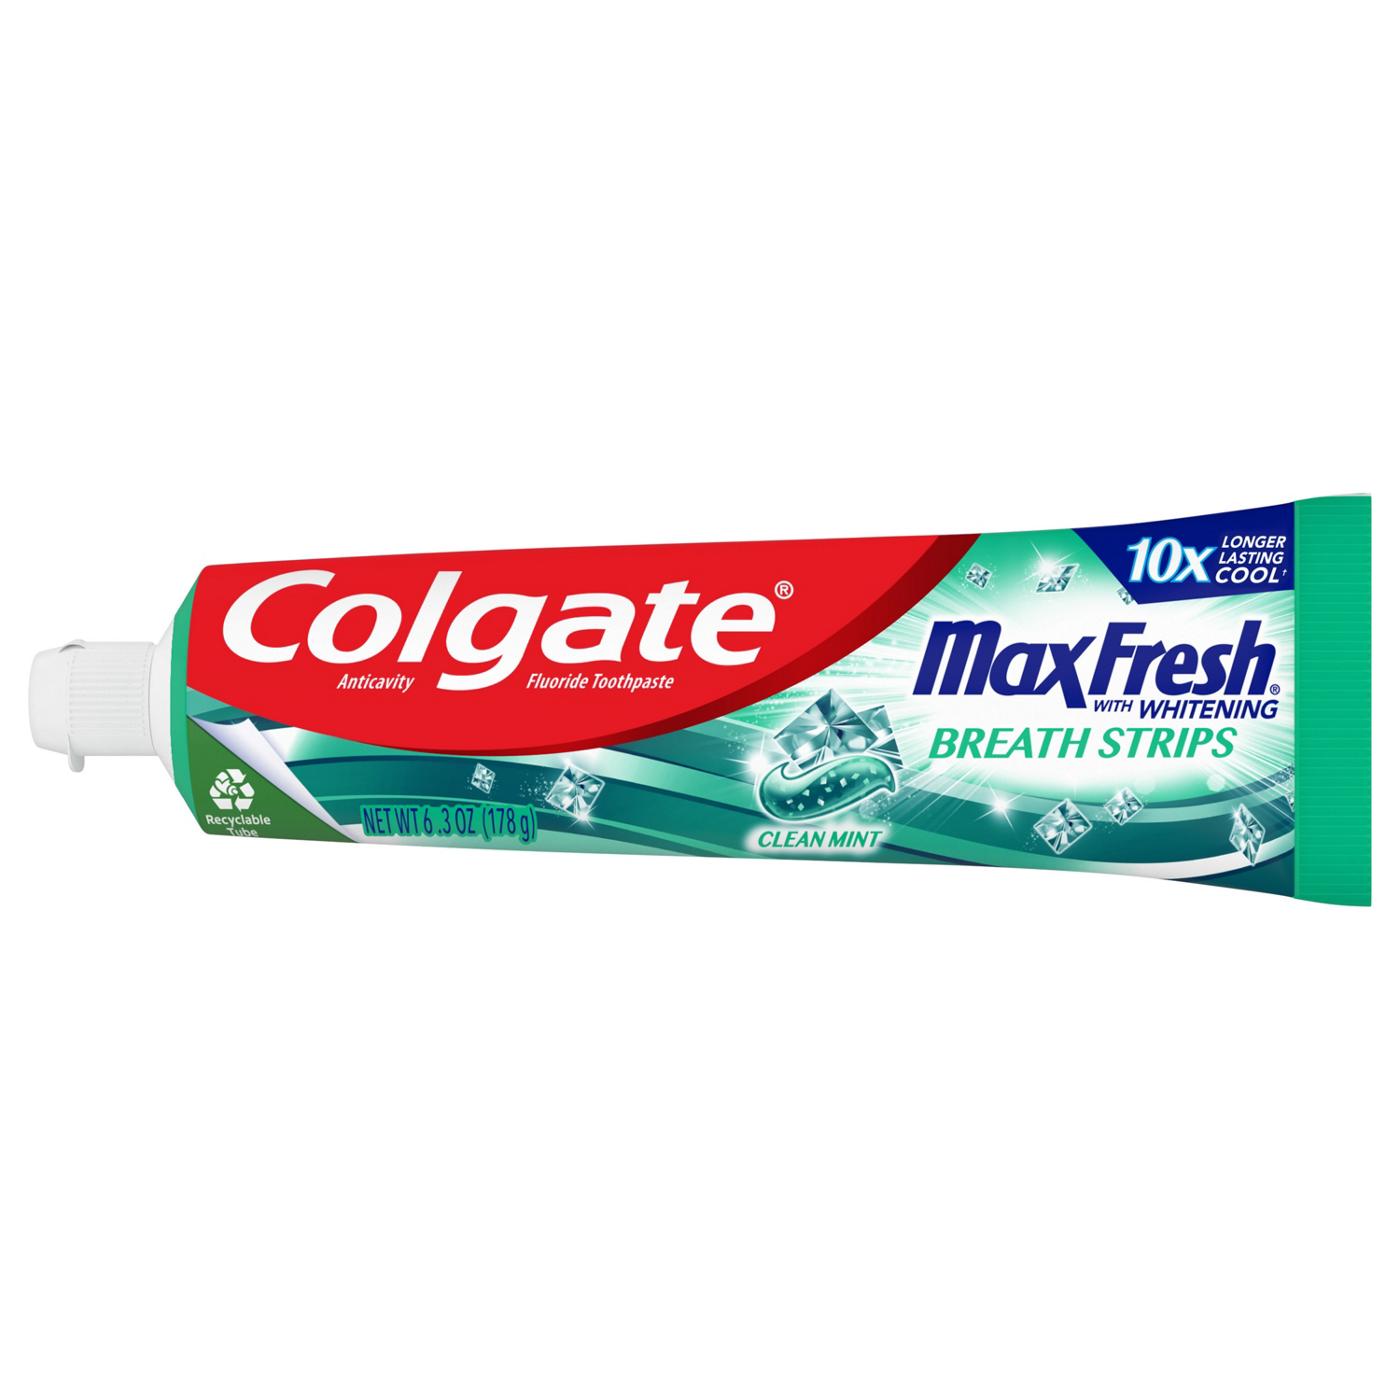 Colgate Max Fresh Anticavity Toothpaste - Clean Mint; image 13 of 13